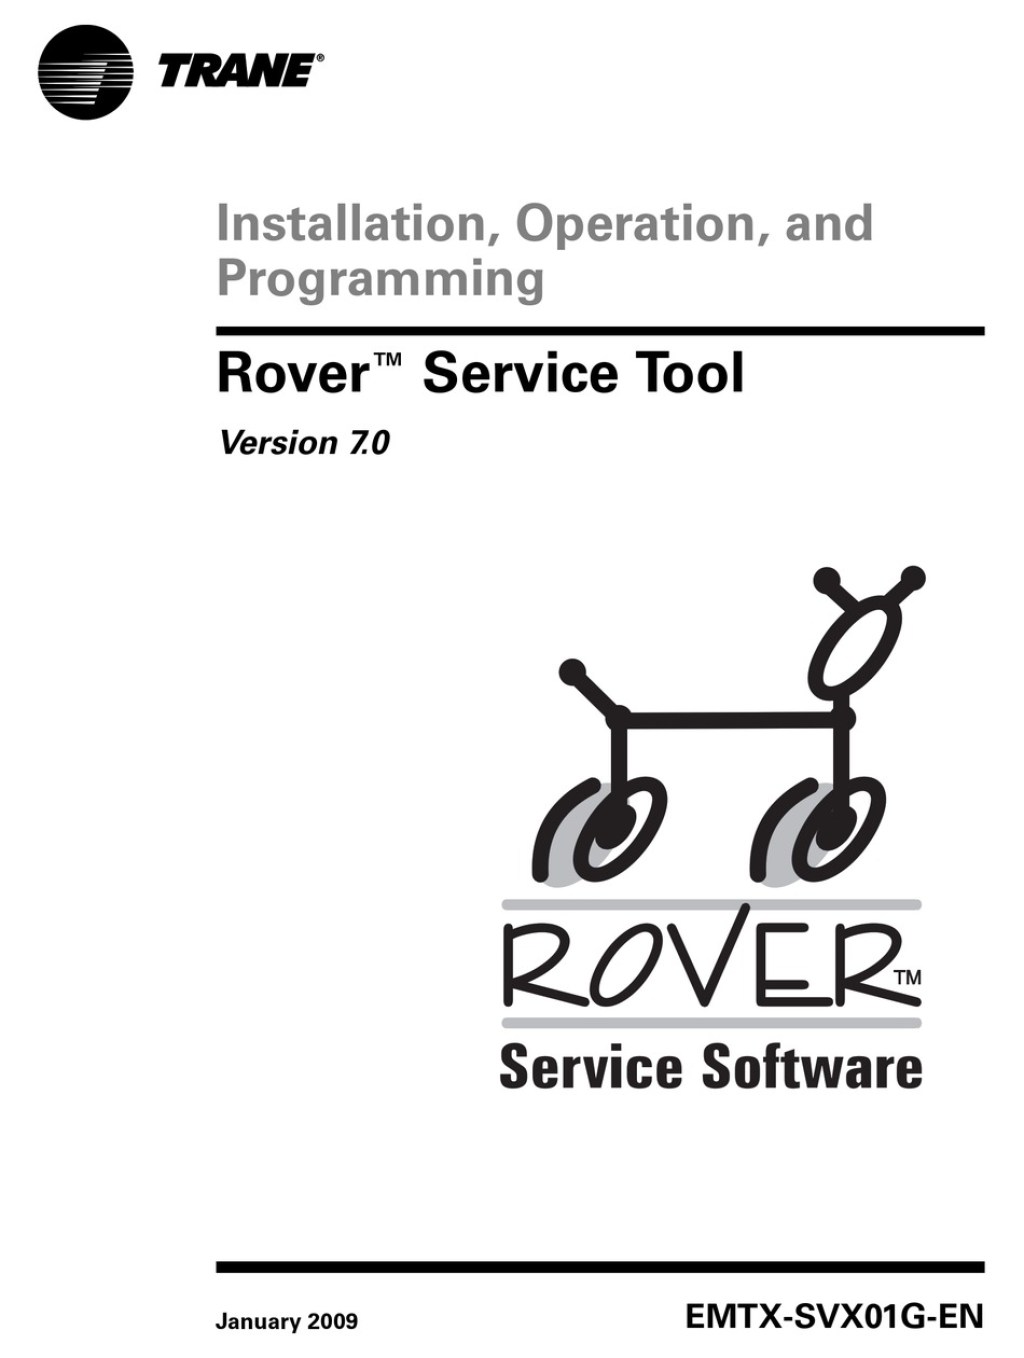 Picture of: TRANE ROVER INSTALLATION, OPERATION, AND PROGRAMMING Pdf Download